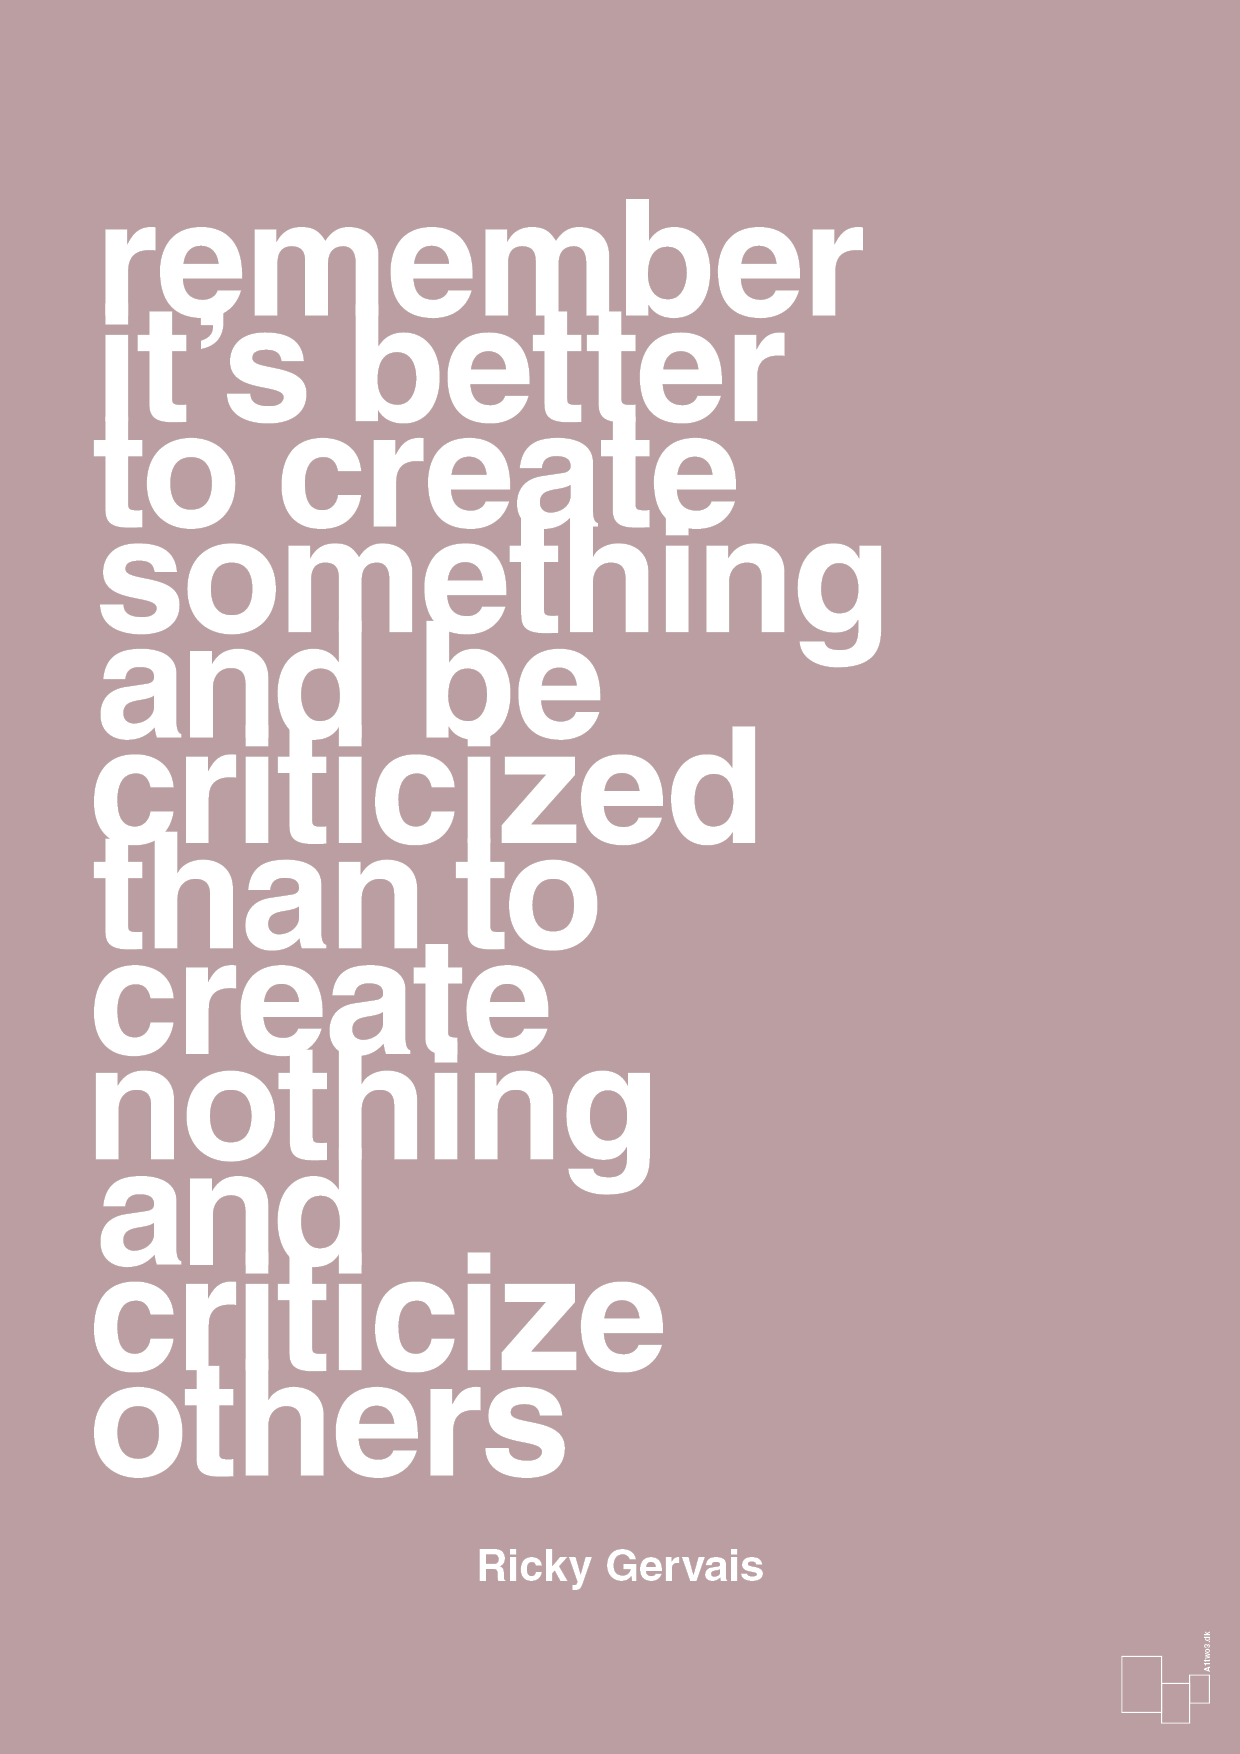 remember its better to create something and be criticized than create nothing and criticize others - Plakat med Citater i Light Rose